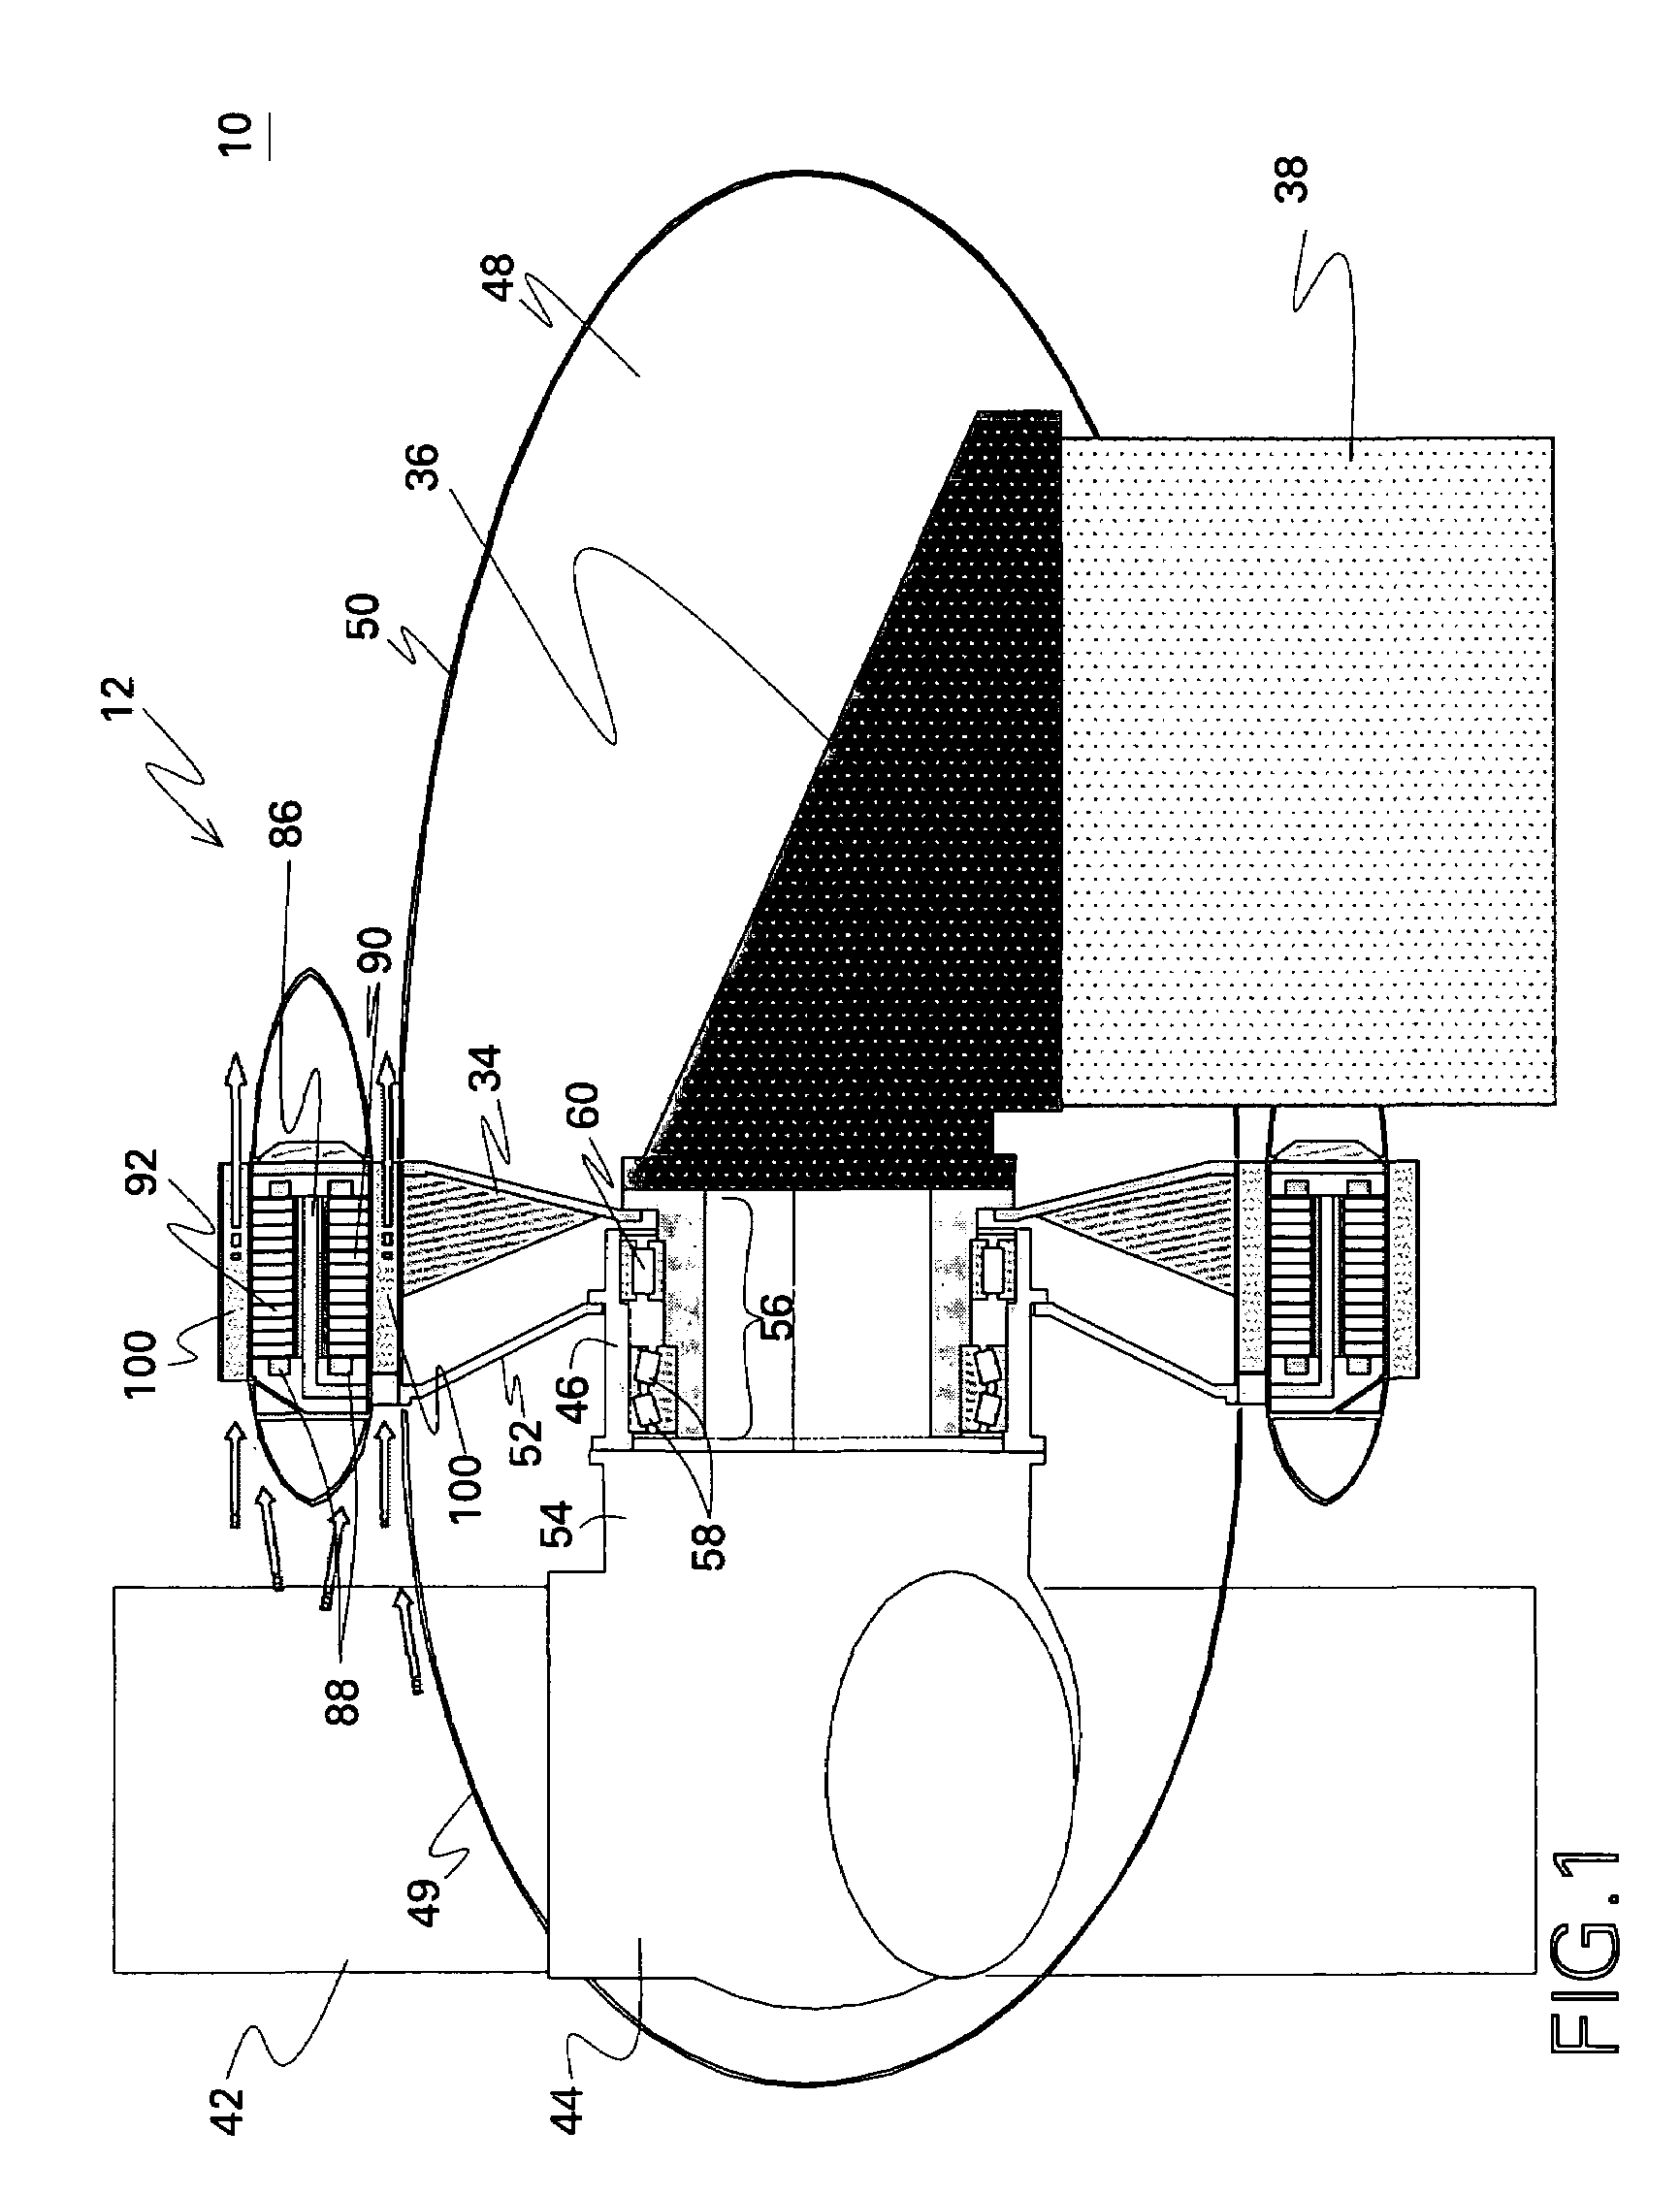 Electrical machine with double-sided rotor